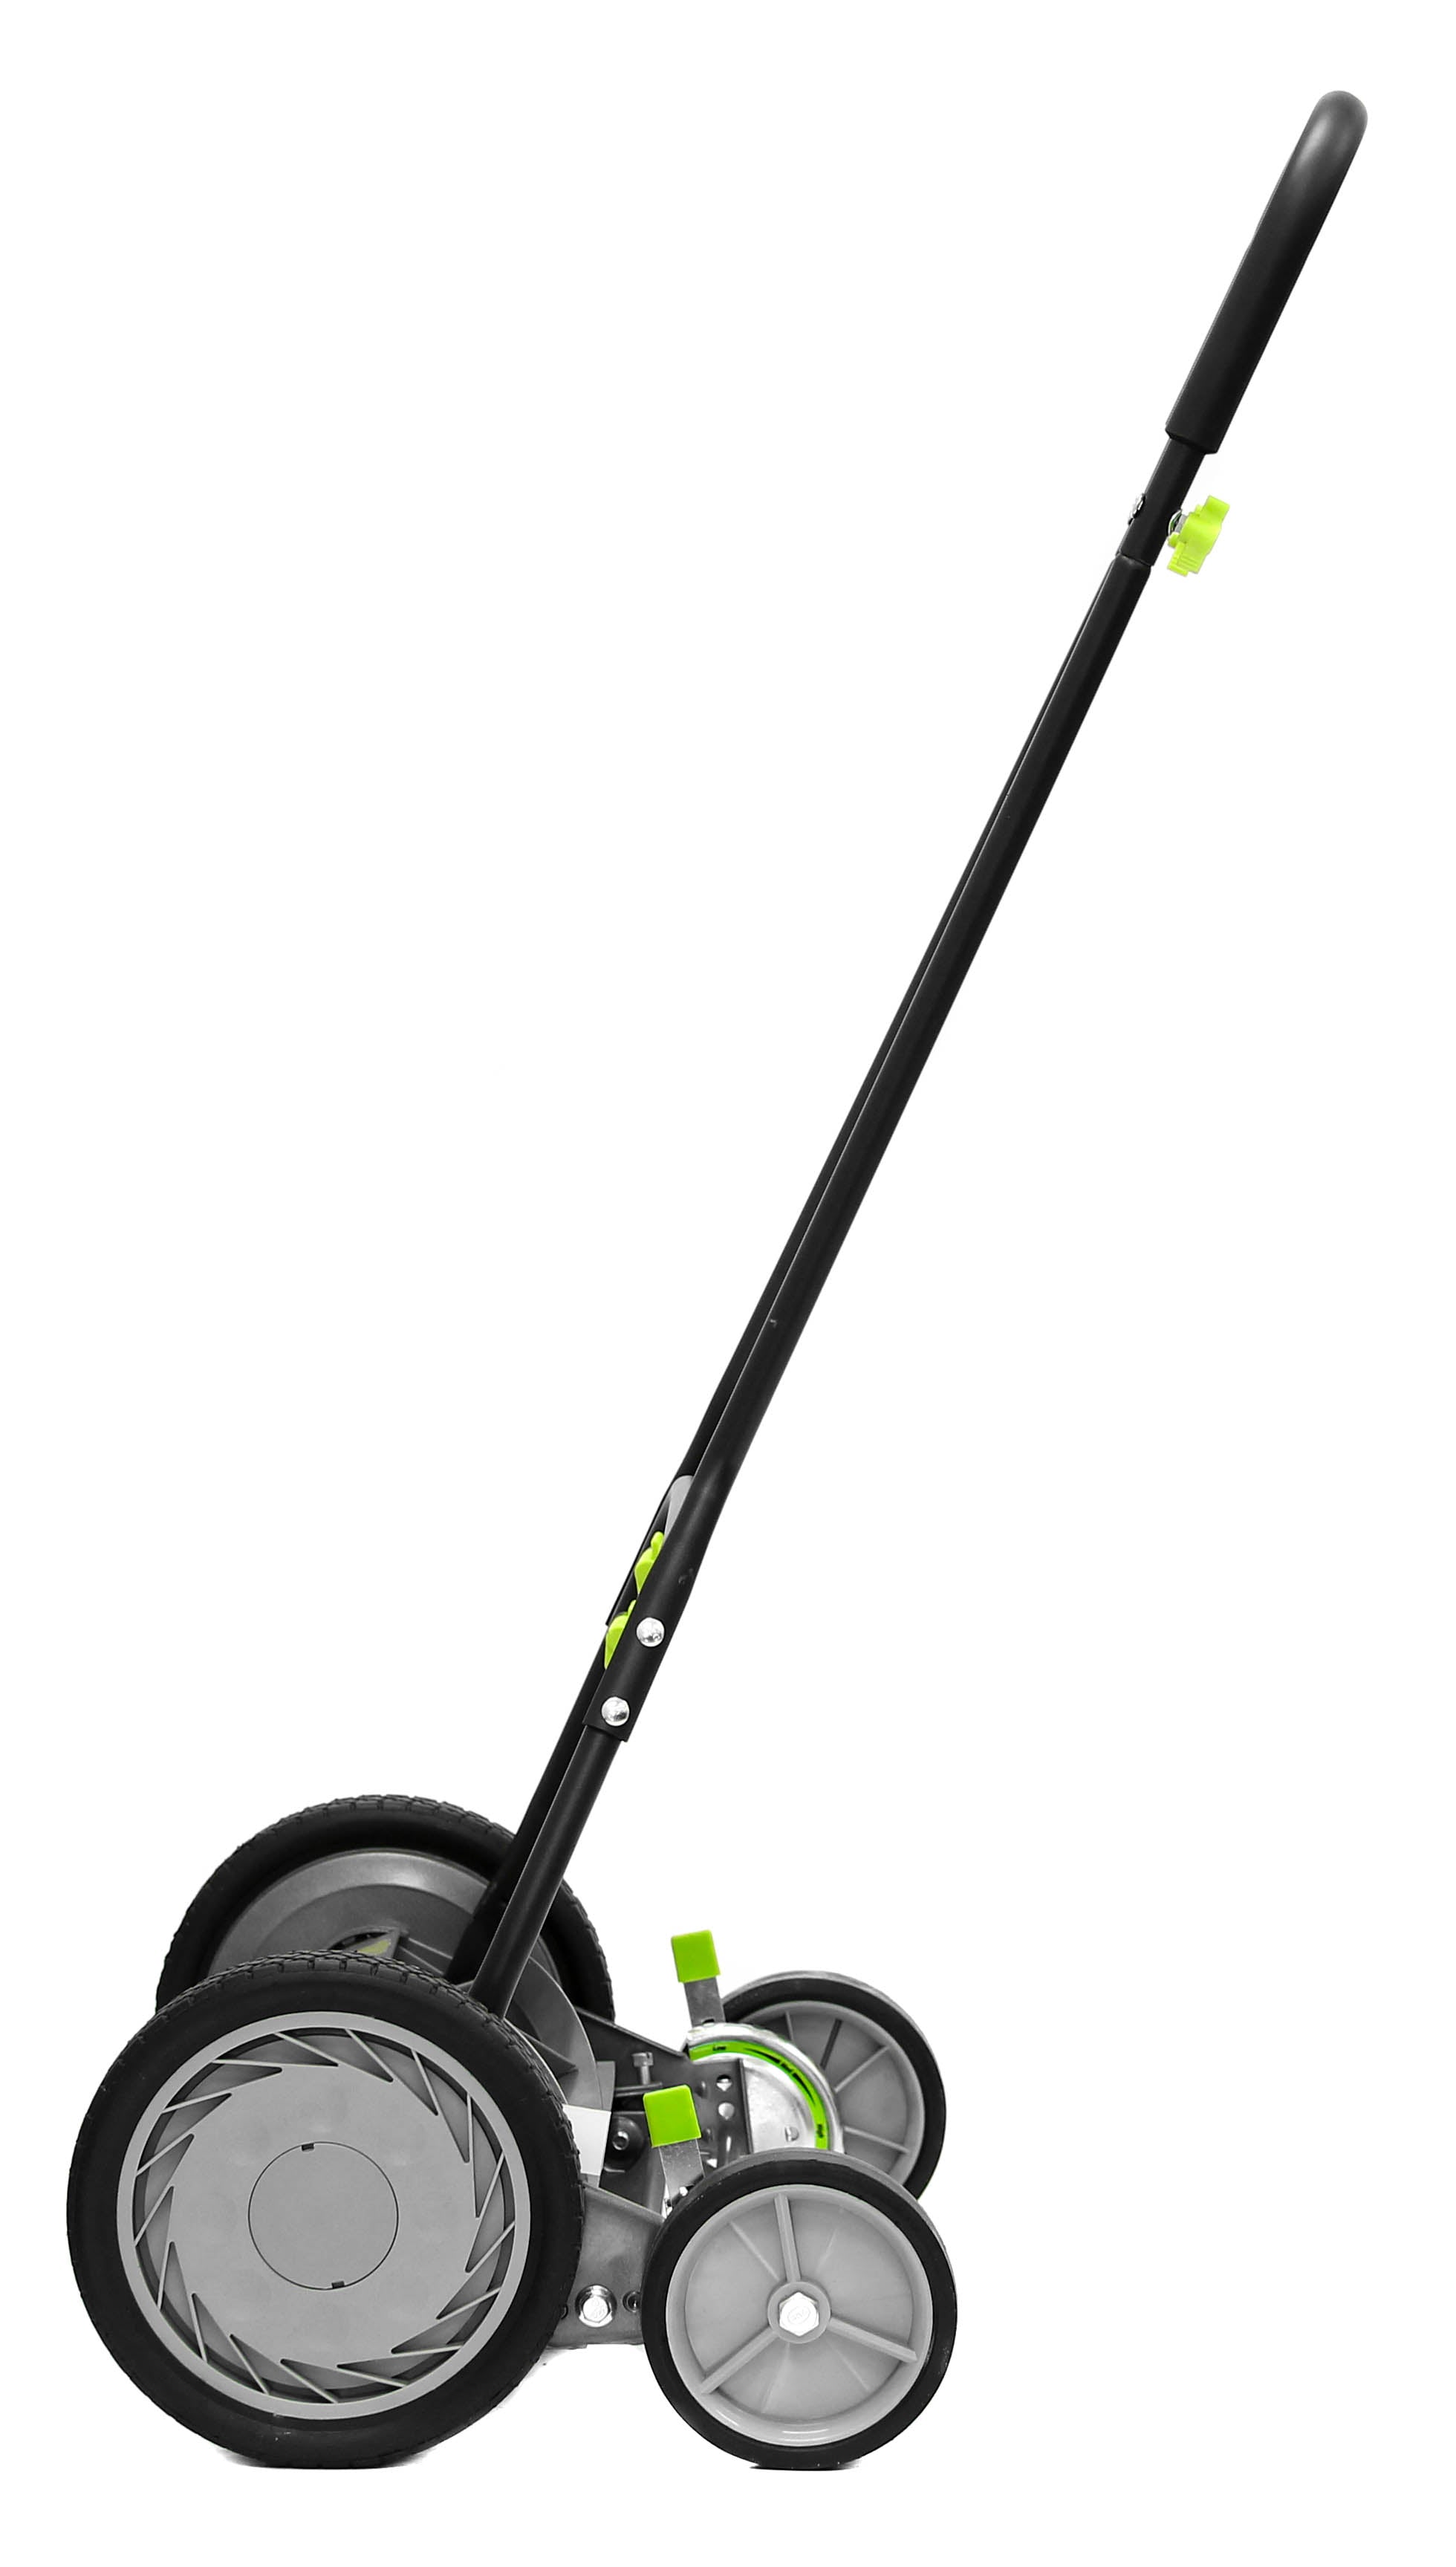 Earthwise Power Tools by ALM 18" Manual Reel Mower with Trailing Wheels